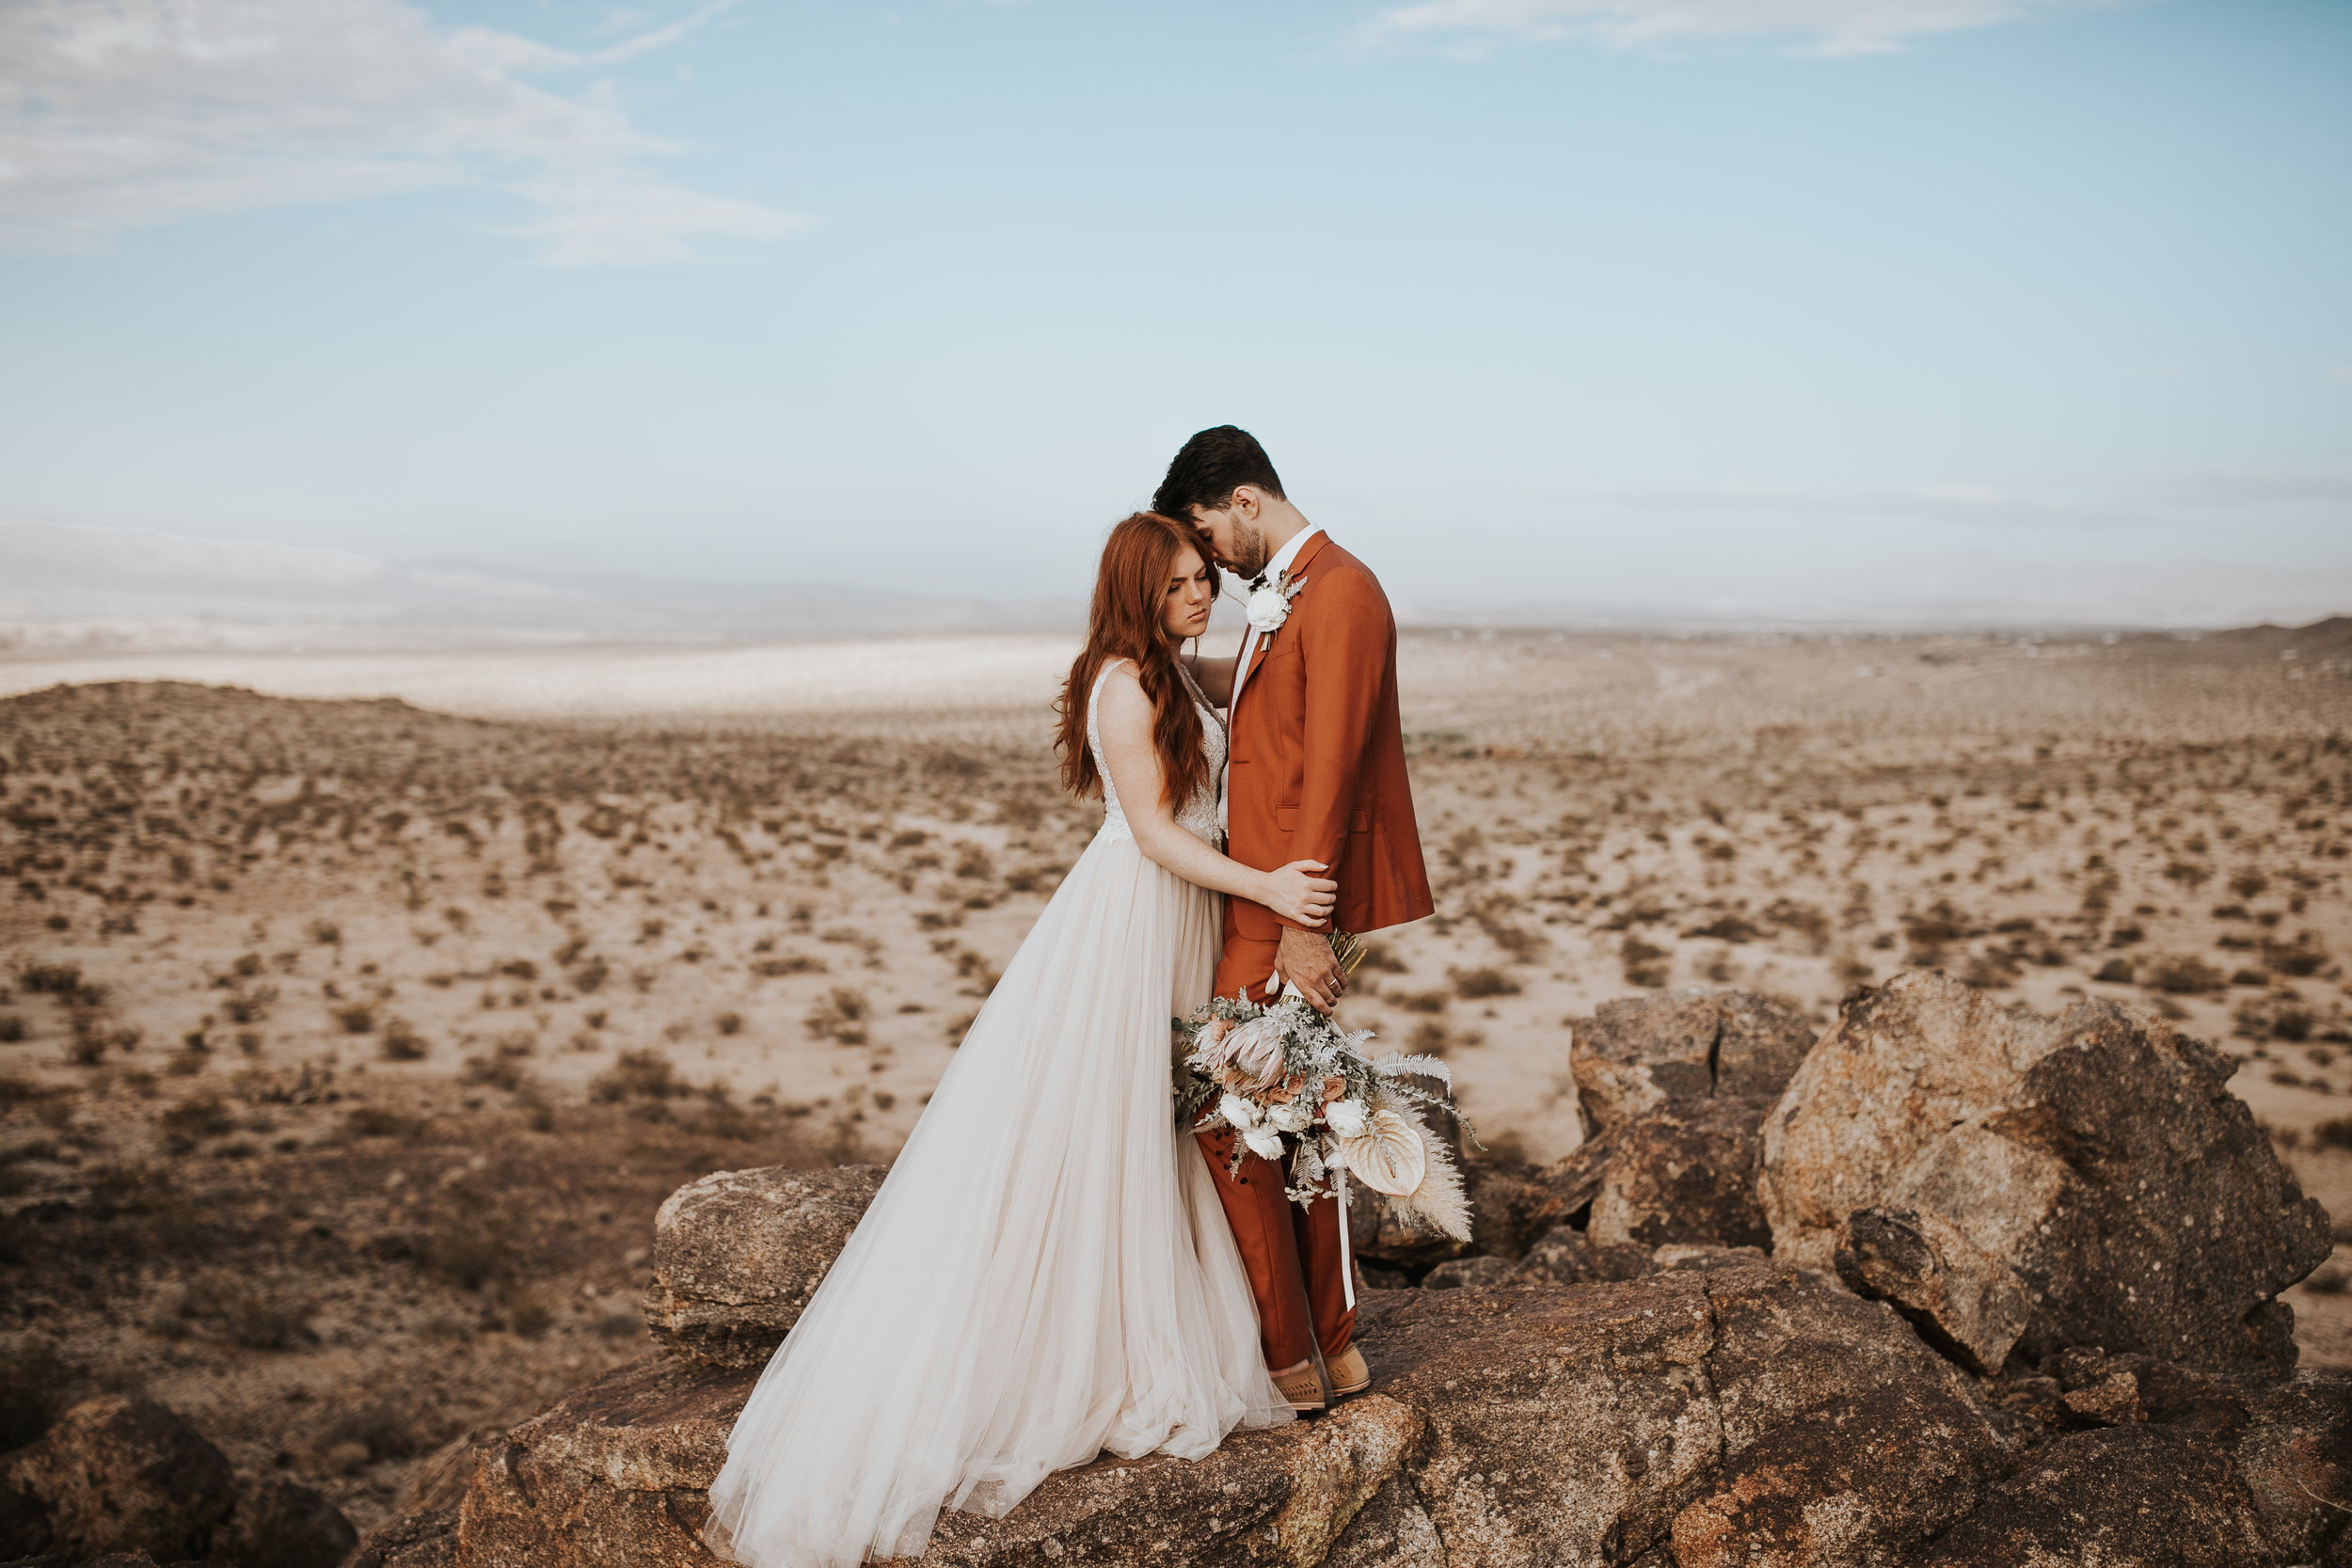 Emilie and Lucas at The Joshua Tree-  Photo by Wild Heart Visuals (Nicole Little)